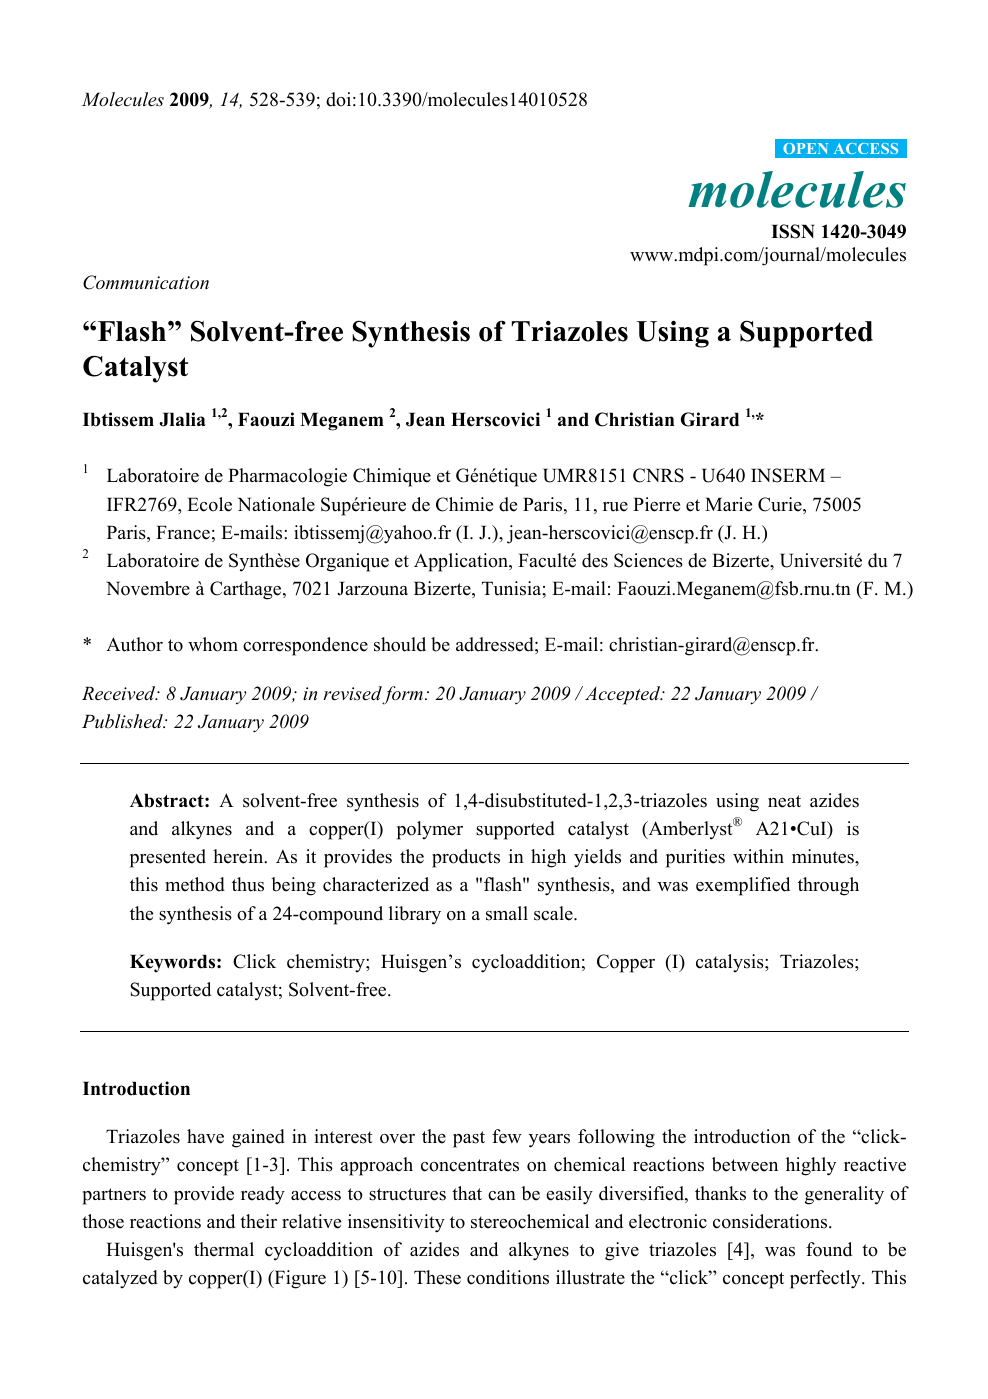 Flash Solvent Free Synthesis Of Triazoles Using A Supported Catalyst Topic Of Research Paper In Chemical Sciences Download Scholarly Article Pdf And Read For Free On Cyberleninka Open Science Hub